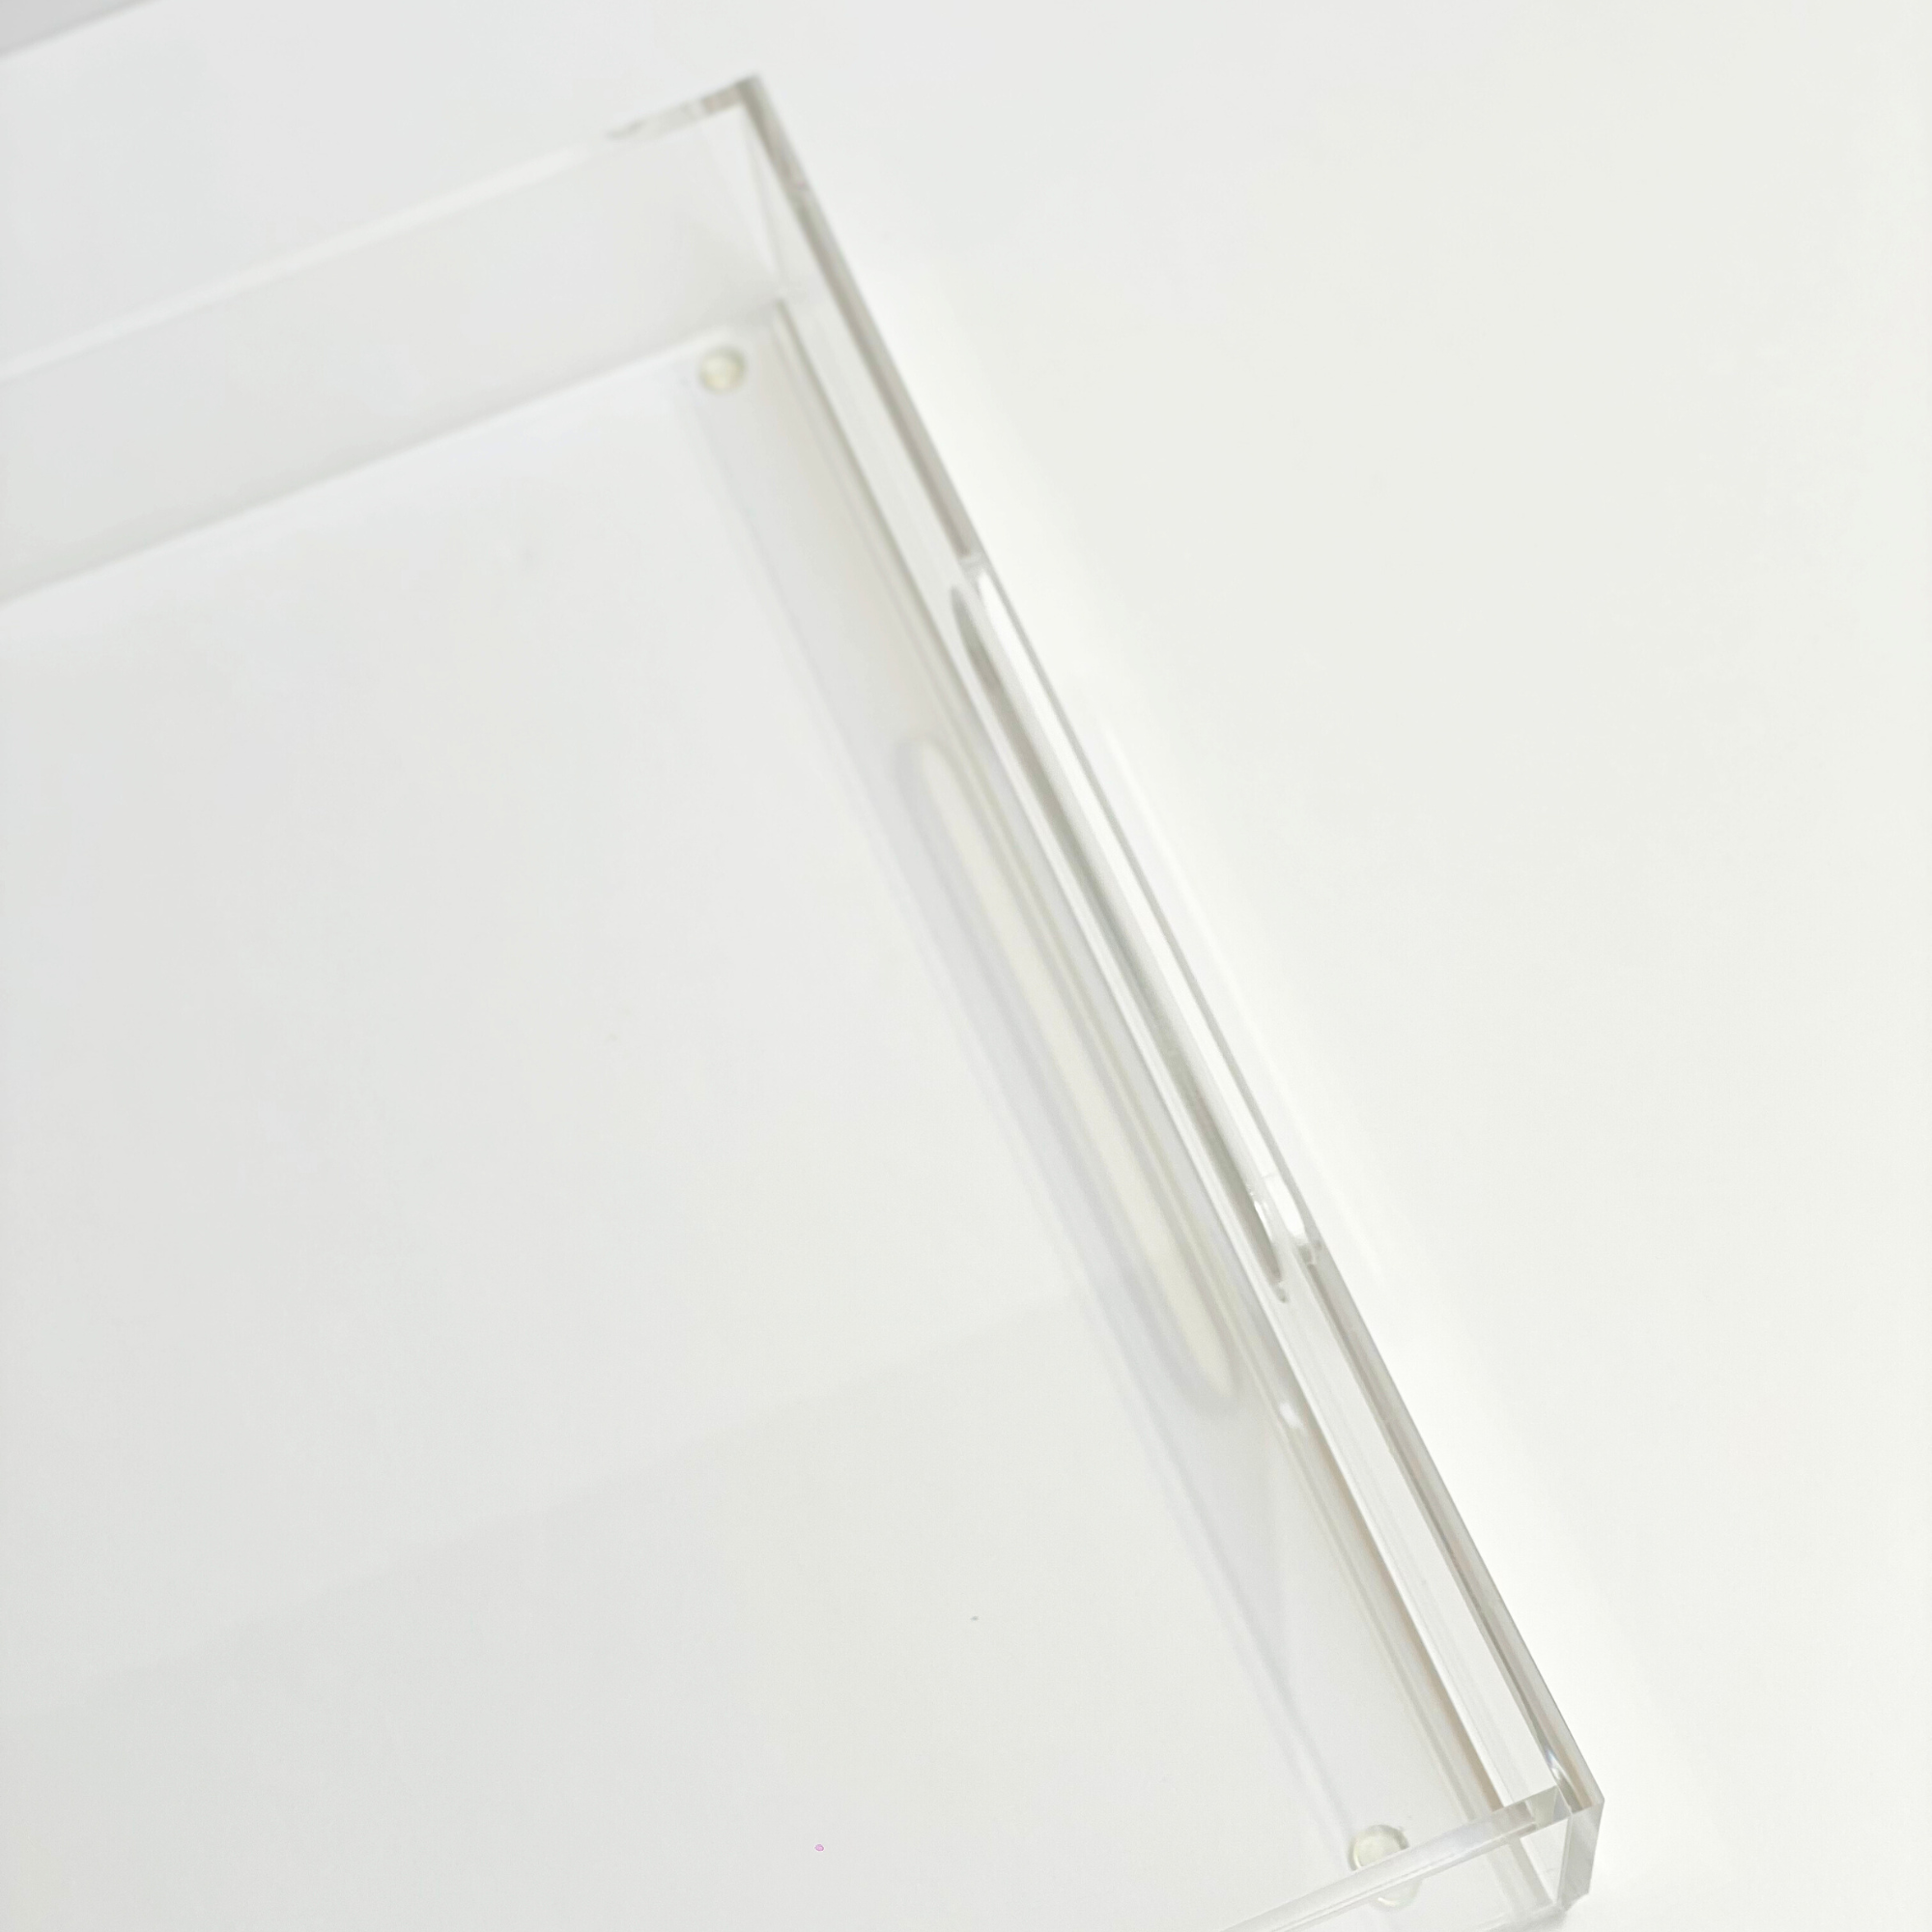 Statement Home clear acrylic serving tray